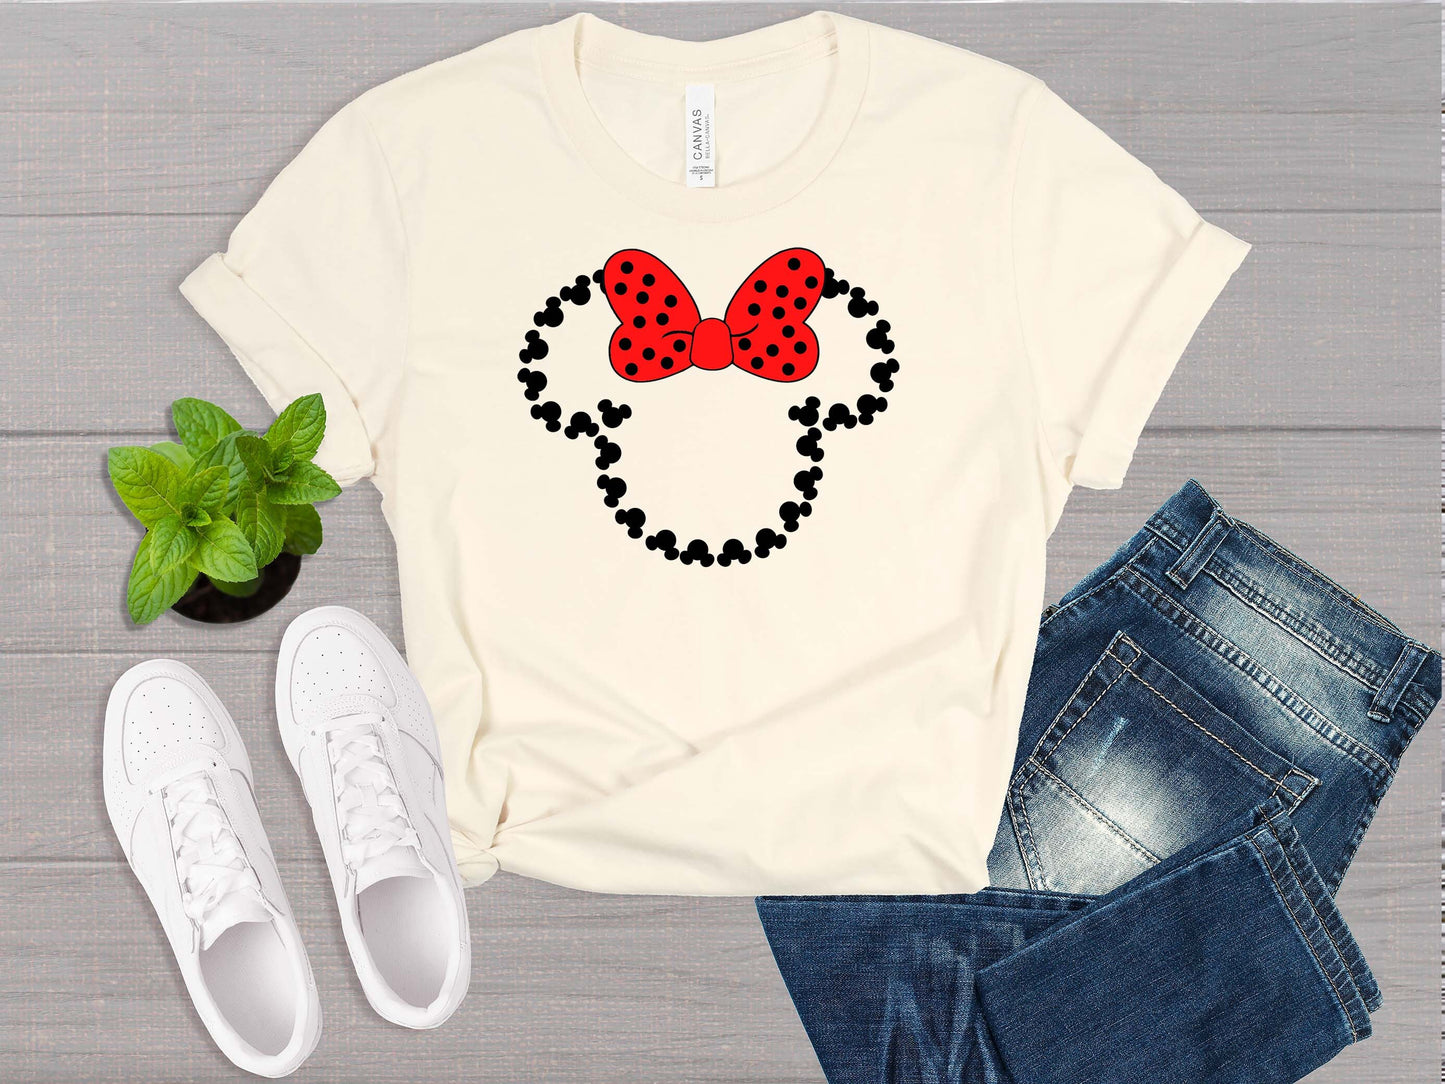 Minnie Shirt, Adult Minnie Mouse Shirt, Toddle Minnie Shirt, Woman Minnie Mouse shirt, Minnie T-shirt